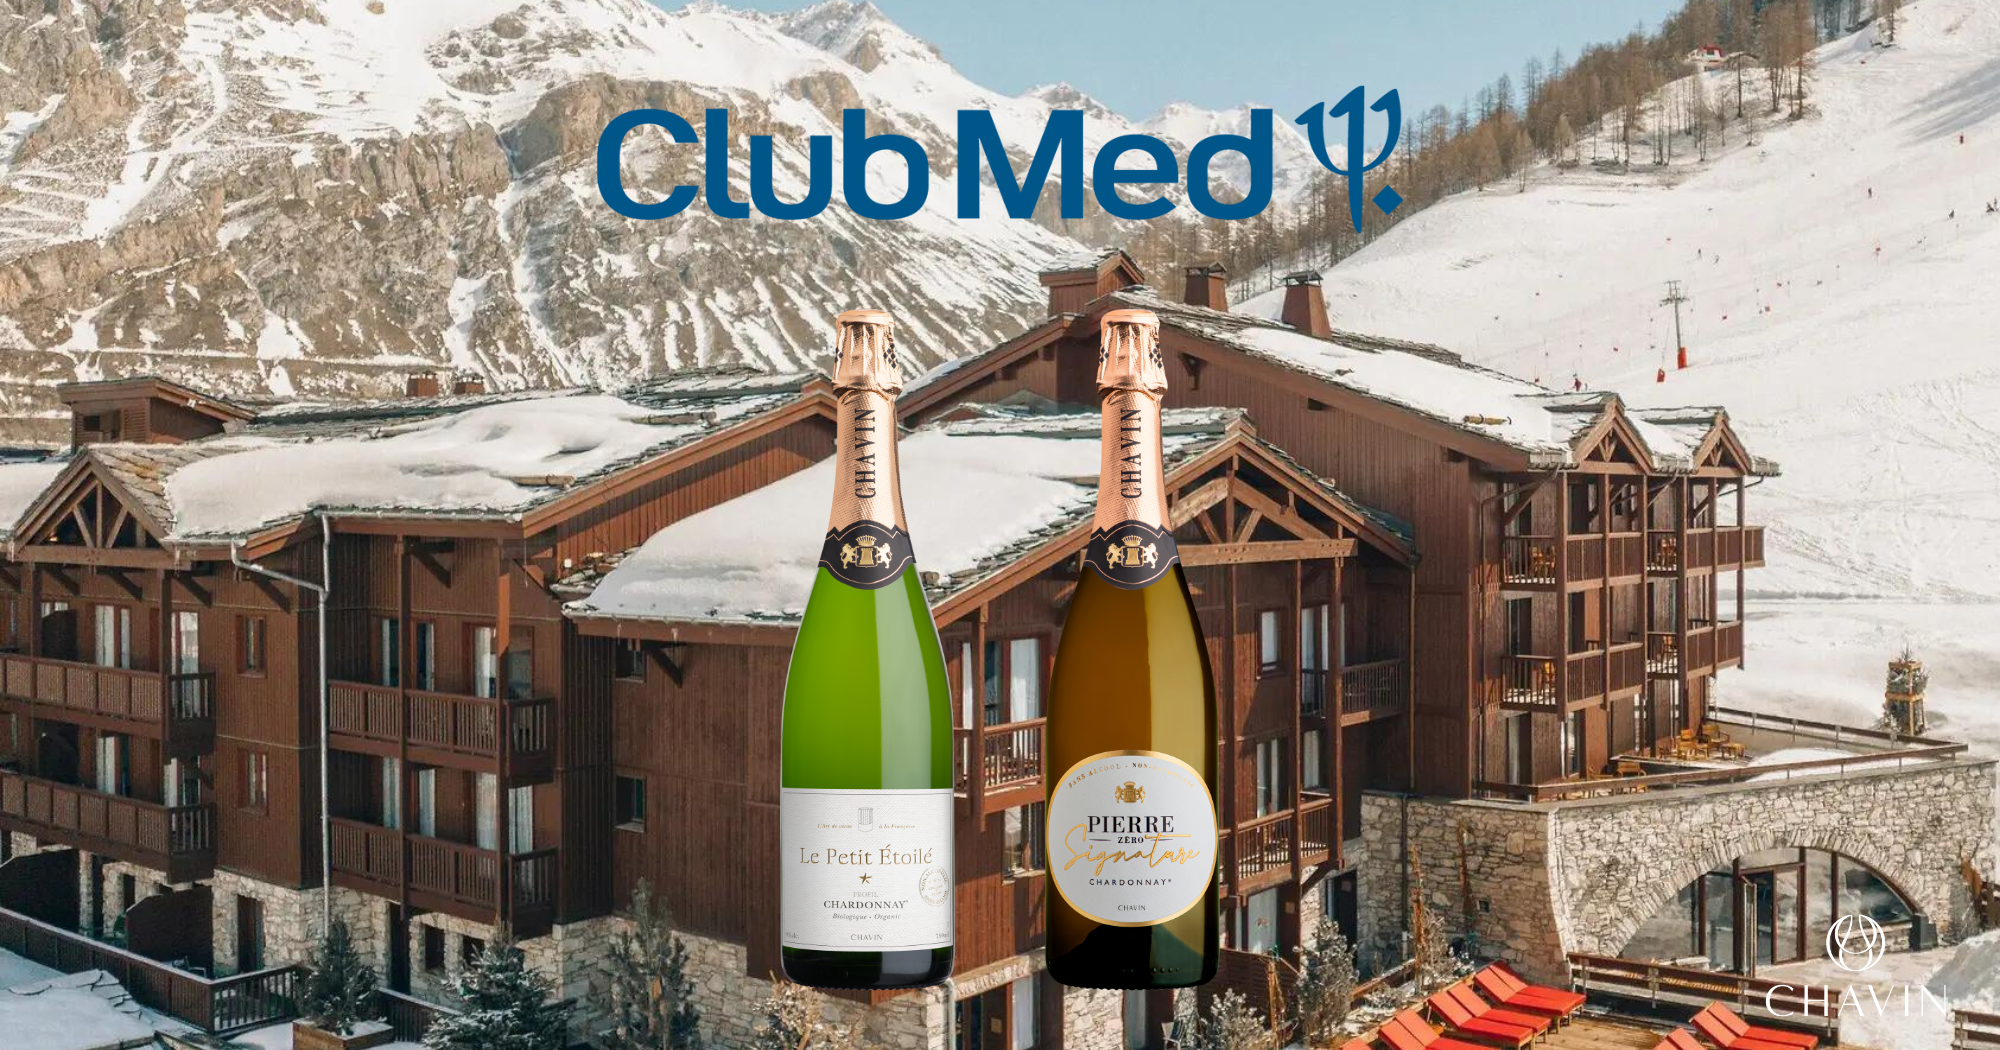 Chavin - Le Petit Etoilu00e9 and Pierre Zu00e9ro listed with Club Med